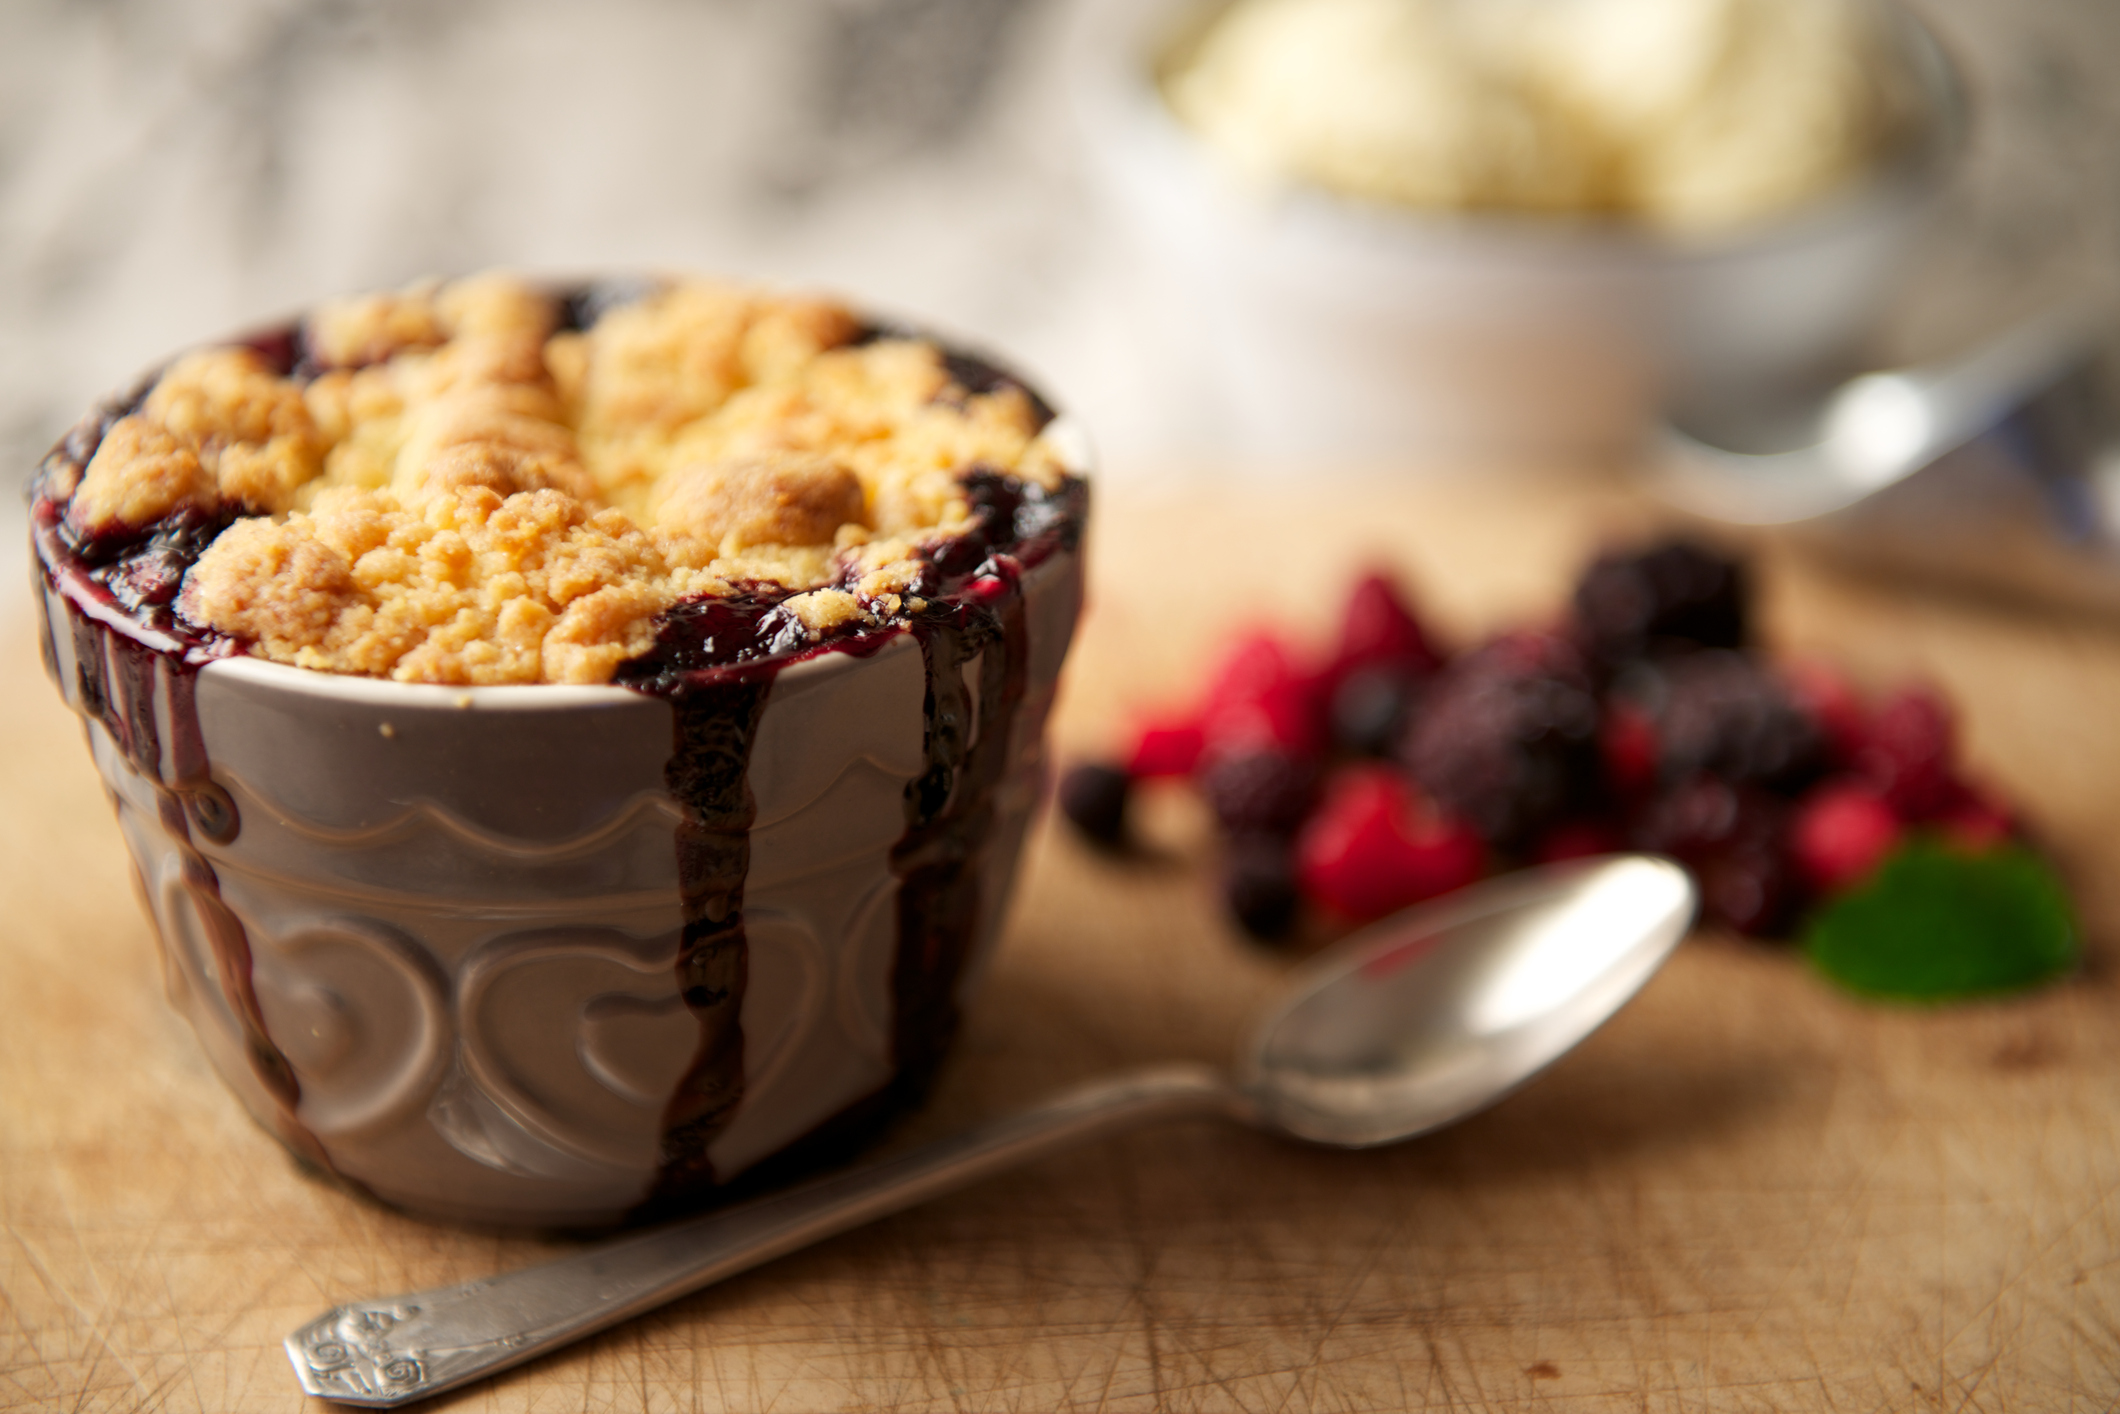 Generic photo of a bowl of fruit crumble (Thinkstock/PA)